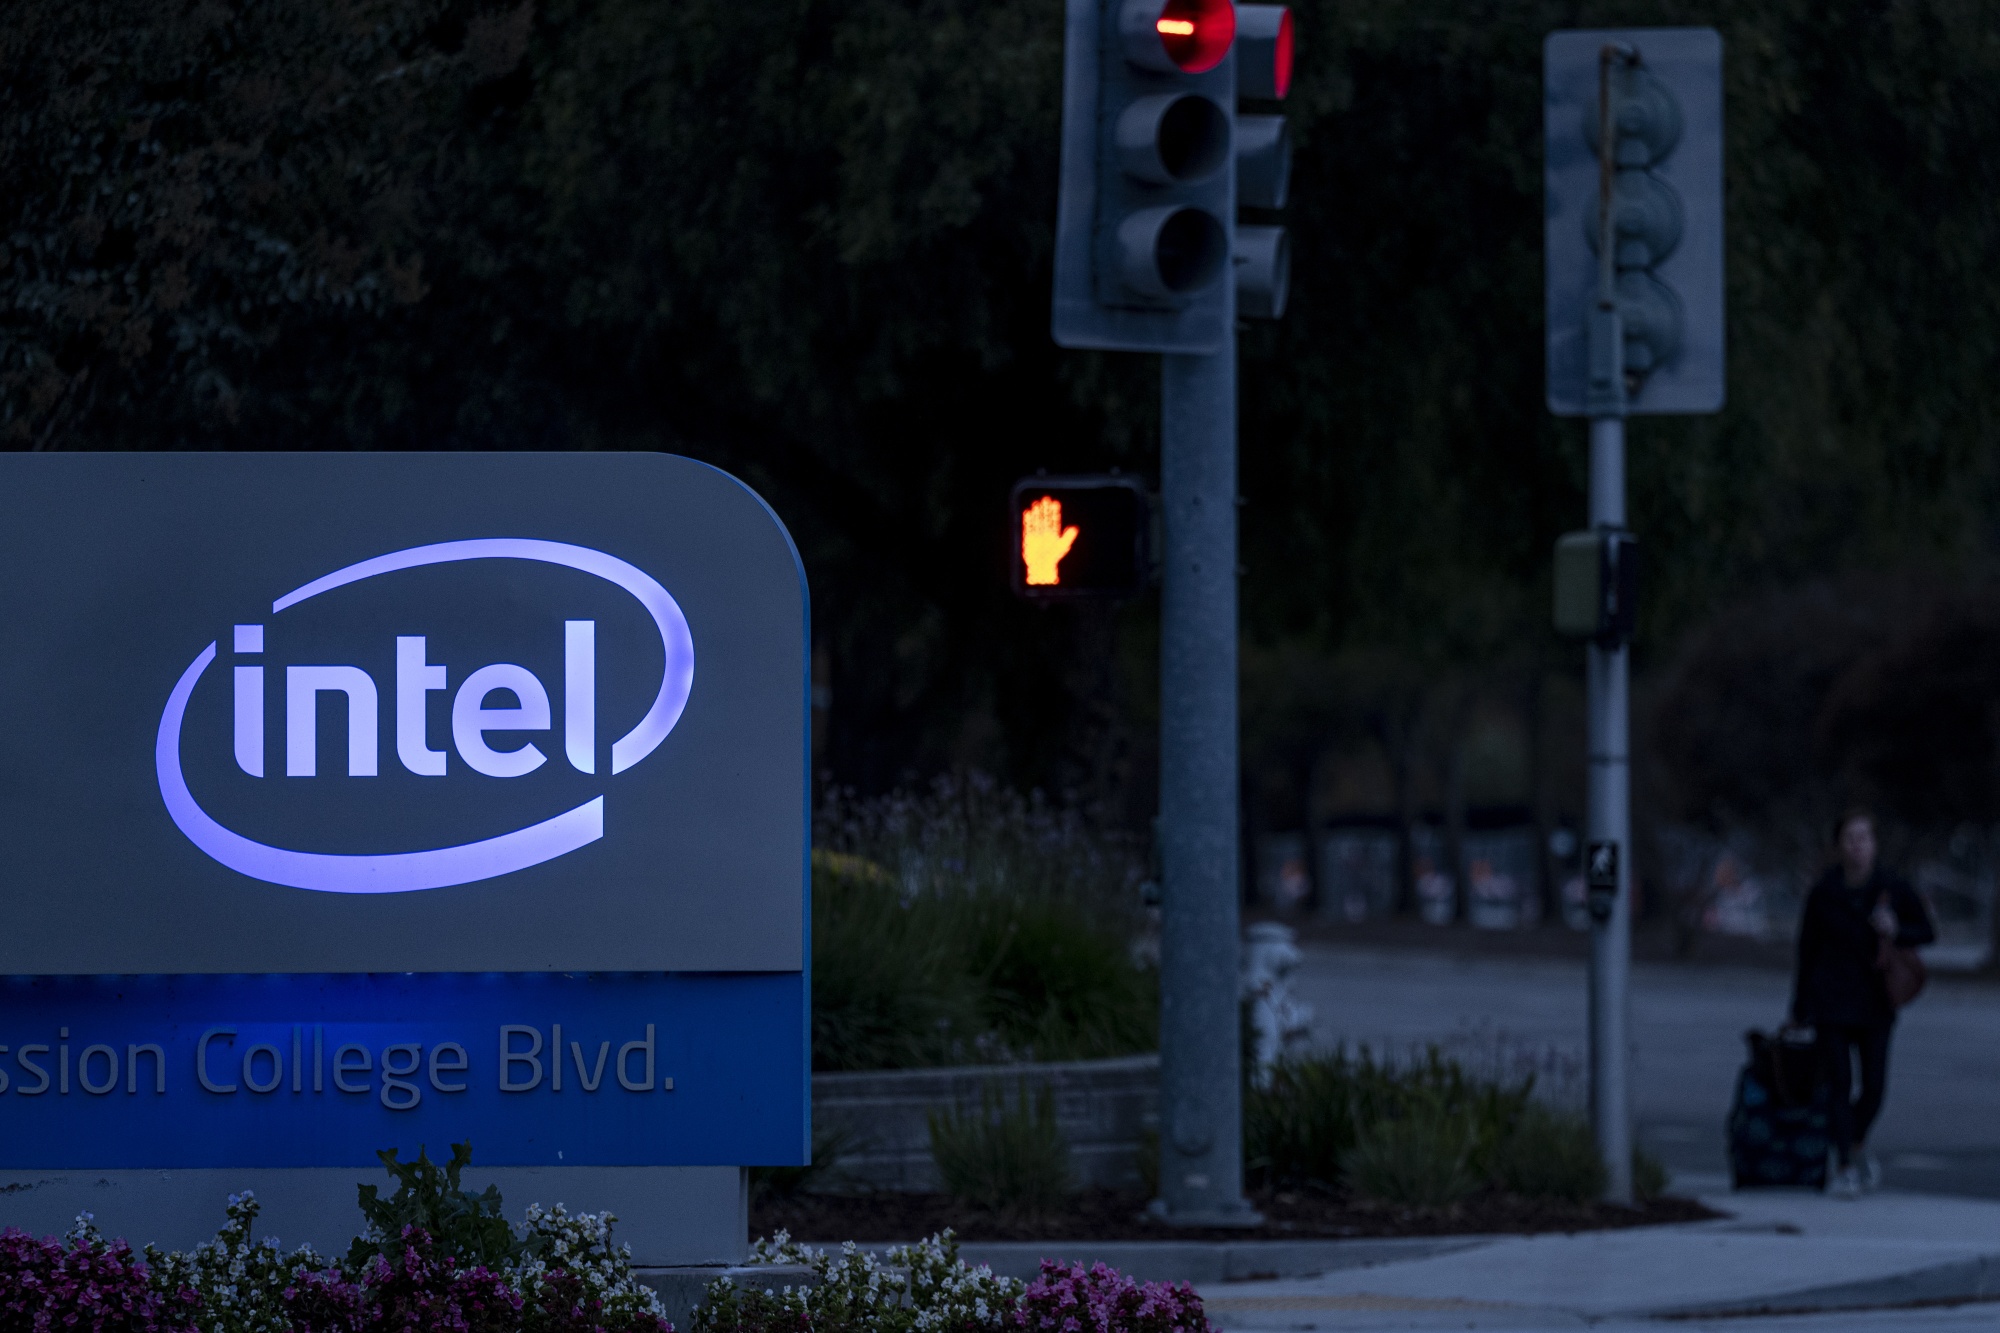 Signage at the entrance to the Intel headquarters in Santa Clara, California, U.S., on Tuesday, Oct. 19, 2021. Intel Corp. is scheduled to release earnings figures on Oct. 21.